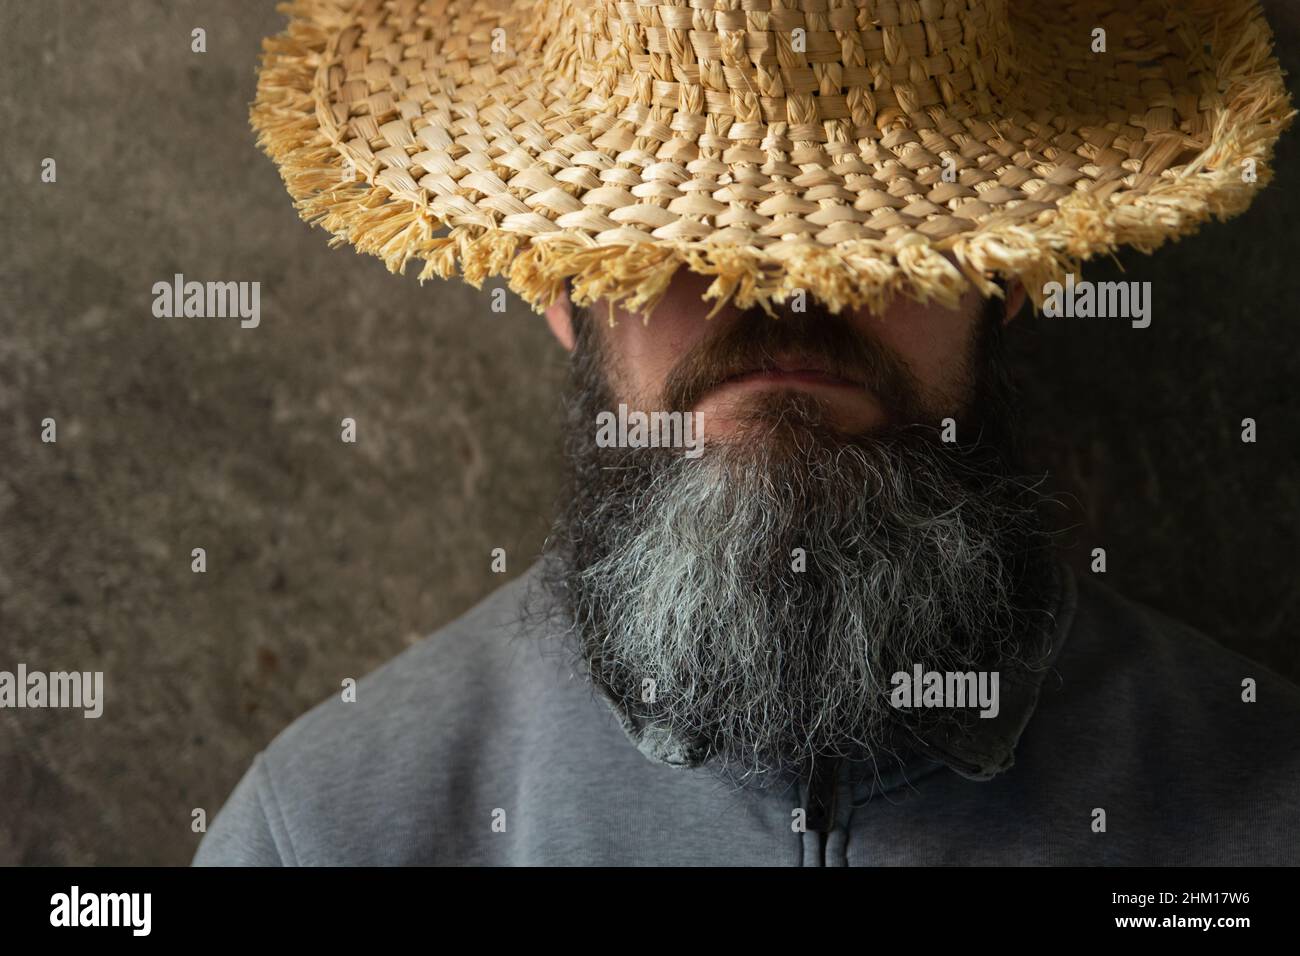 A napping man with a long beard in a hat, male portrait Stock Photo